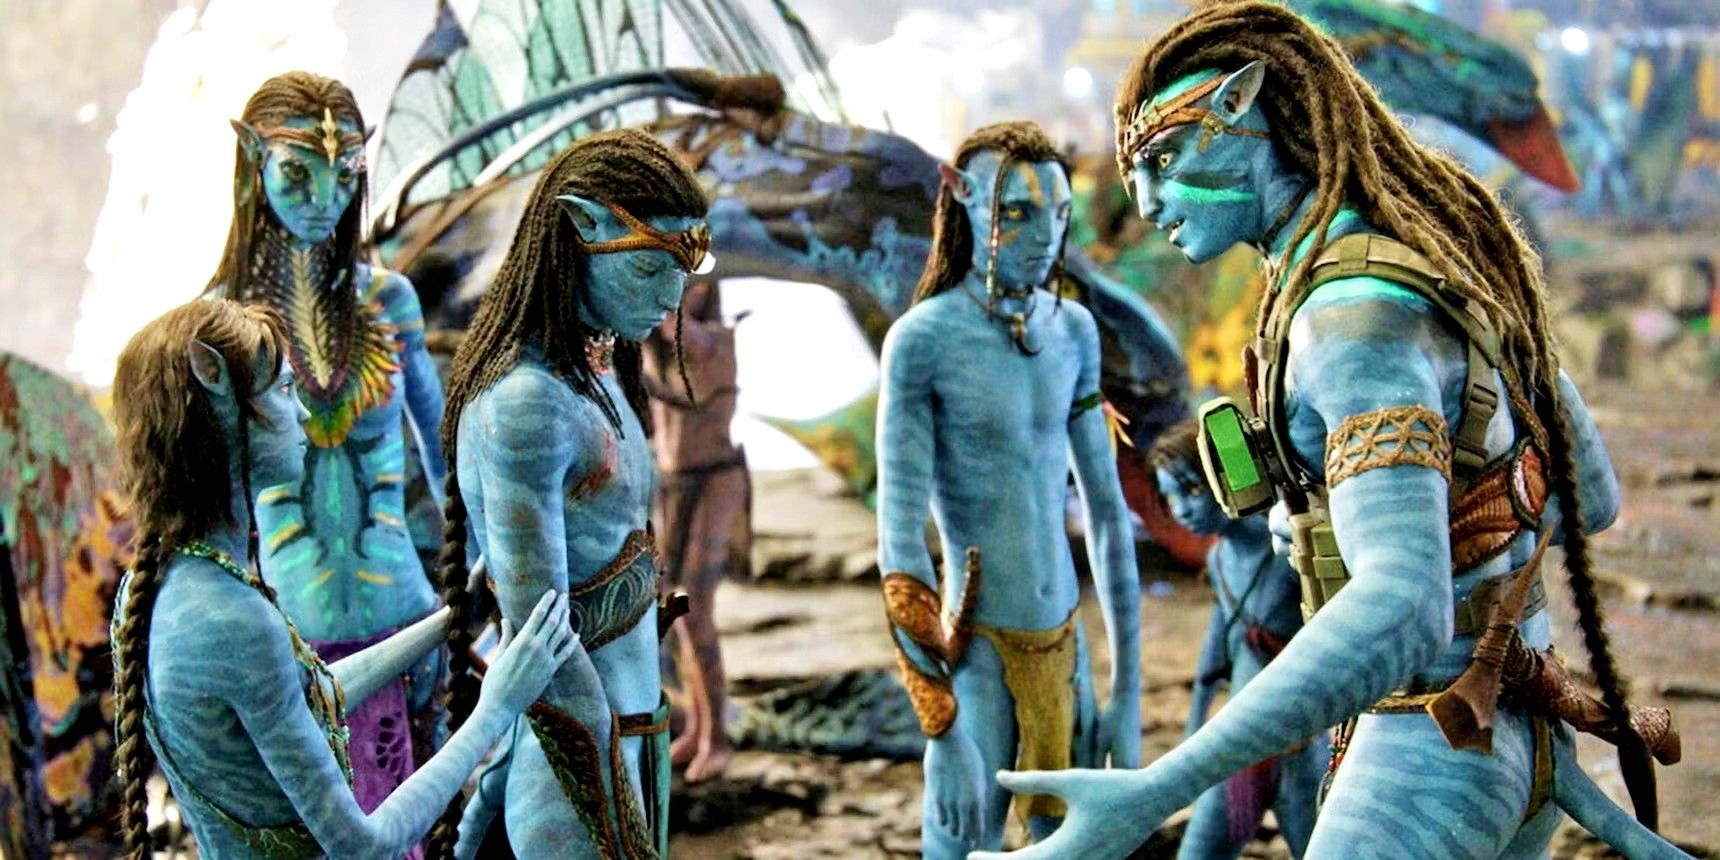 Avatar 2: Jake’s Military-Like Parenting Style & Effect On Kids Examined By Therapist